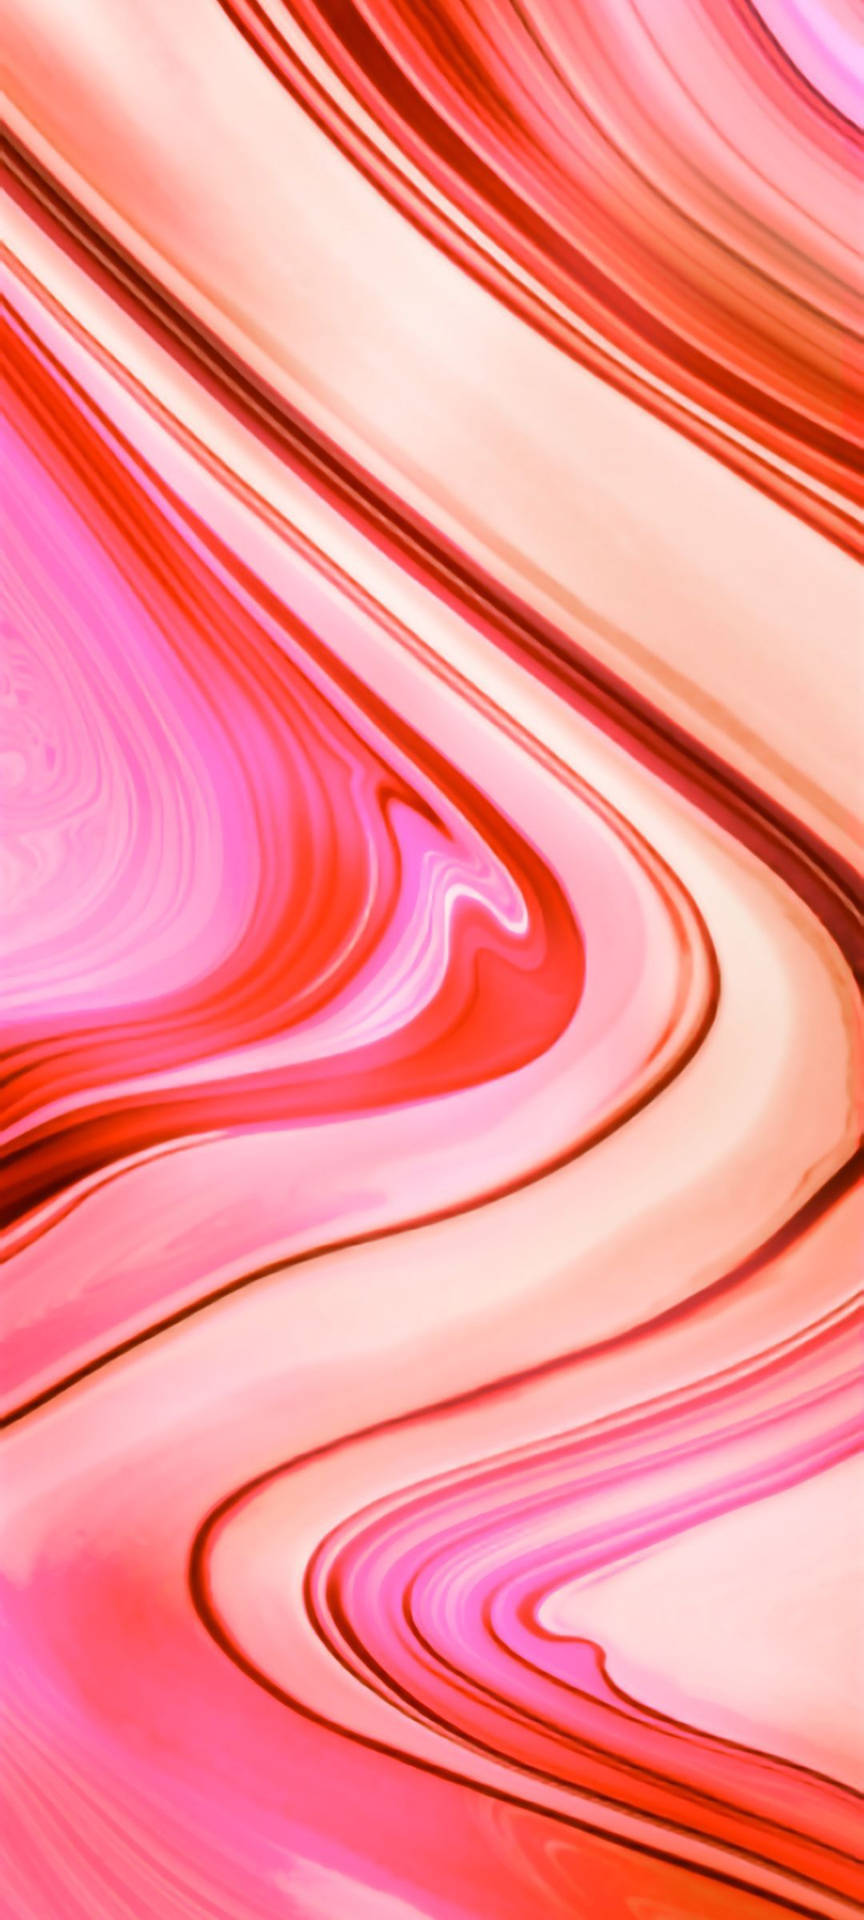 Vibrant Redmi 9 With Beautiful Abstract Liquid Color Splash Background Background